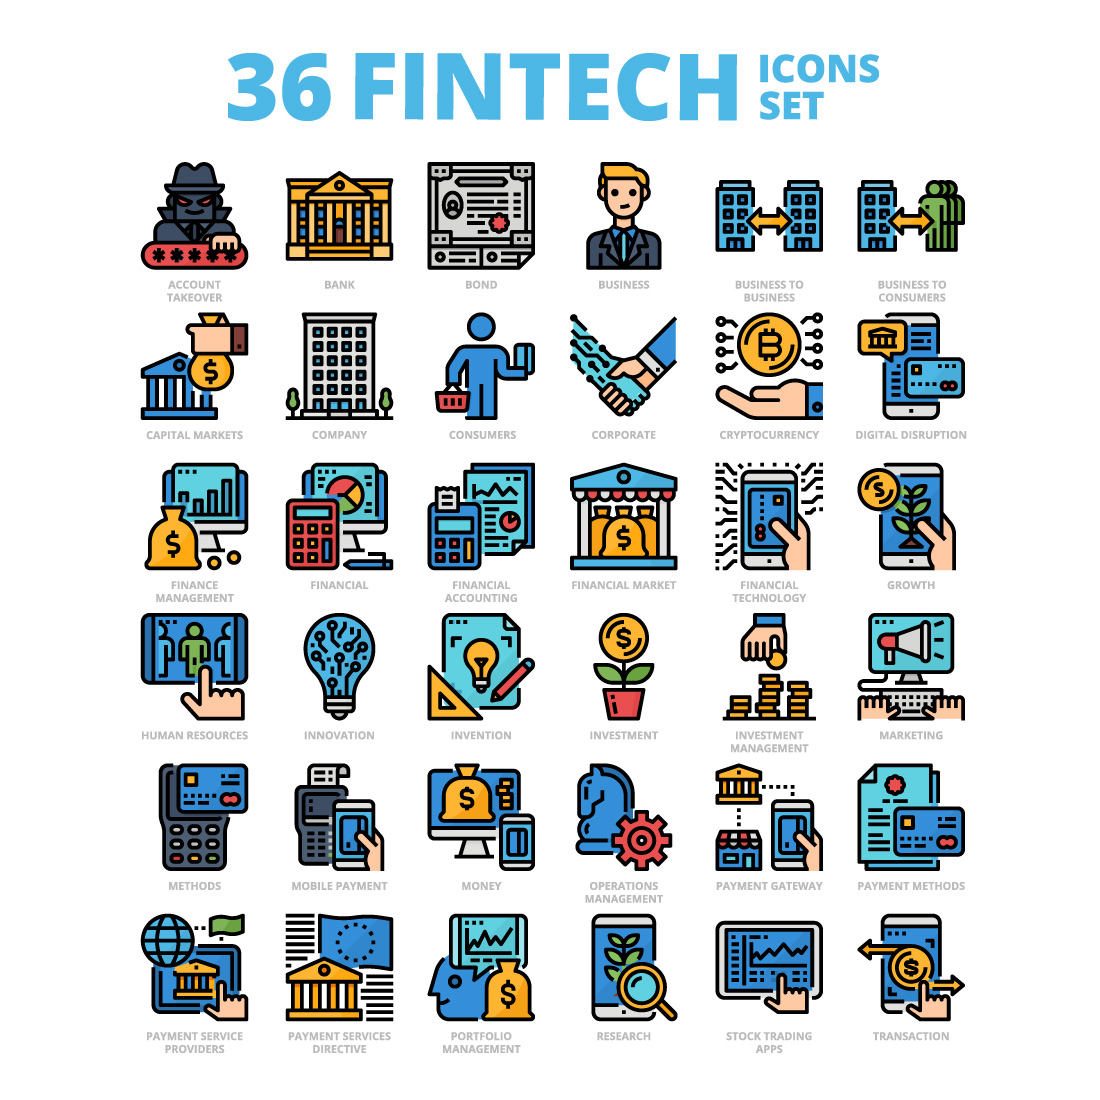 36 Fintech Icons Set x 4 Styles cover image.